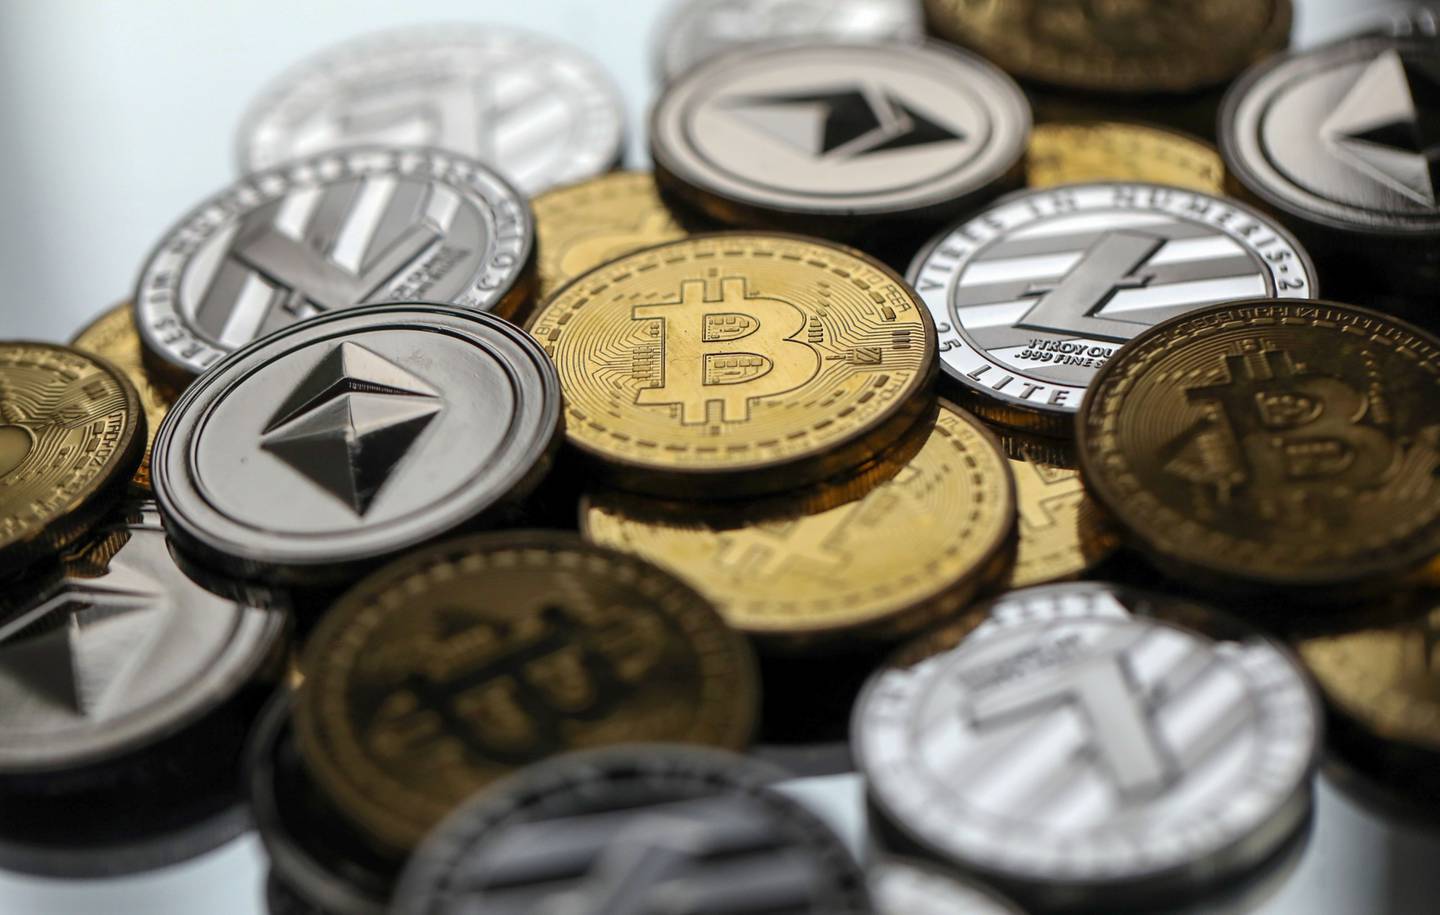 The U.S. and Canada mobilized $756 billion in cryptocurrencies between July 2020 and June 2021, according to a report by Chainalysisdfd